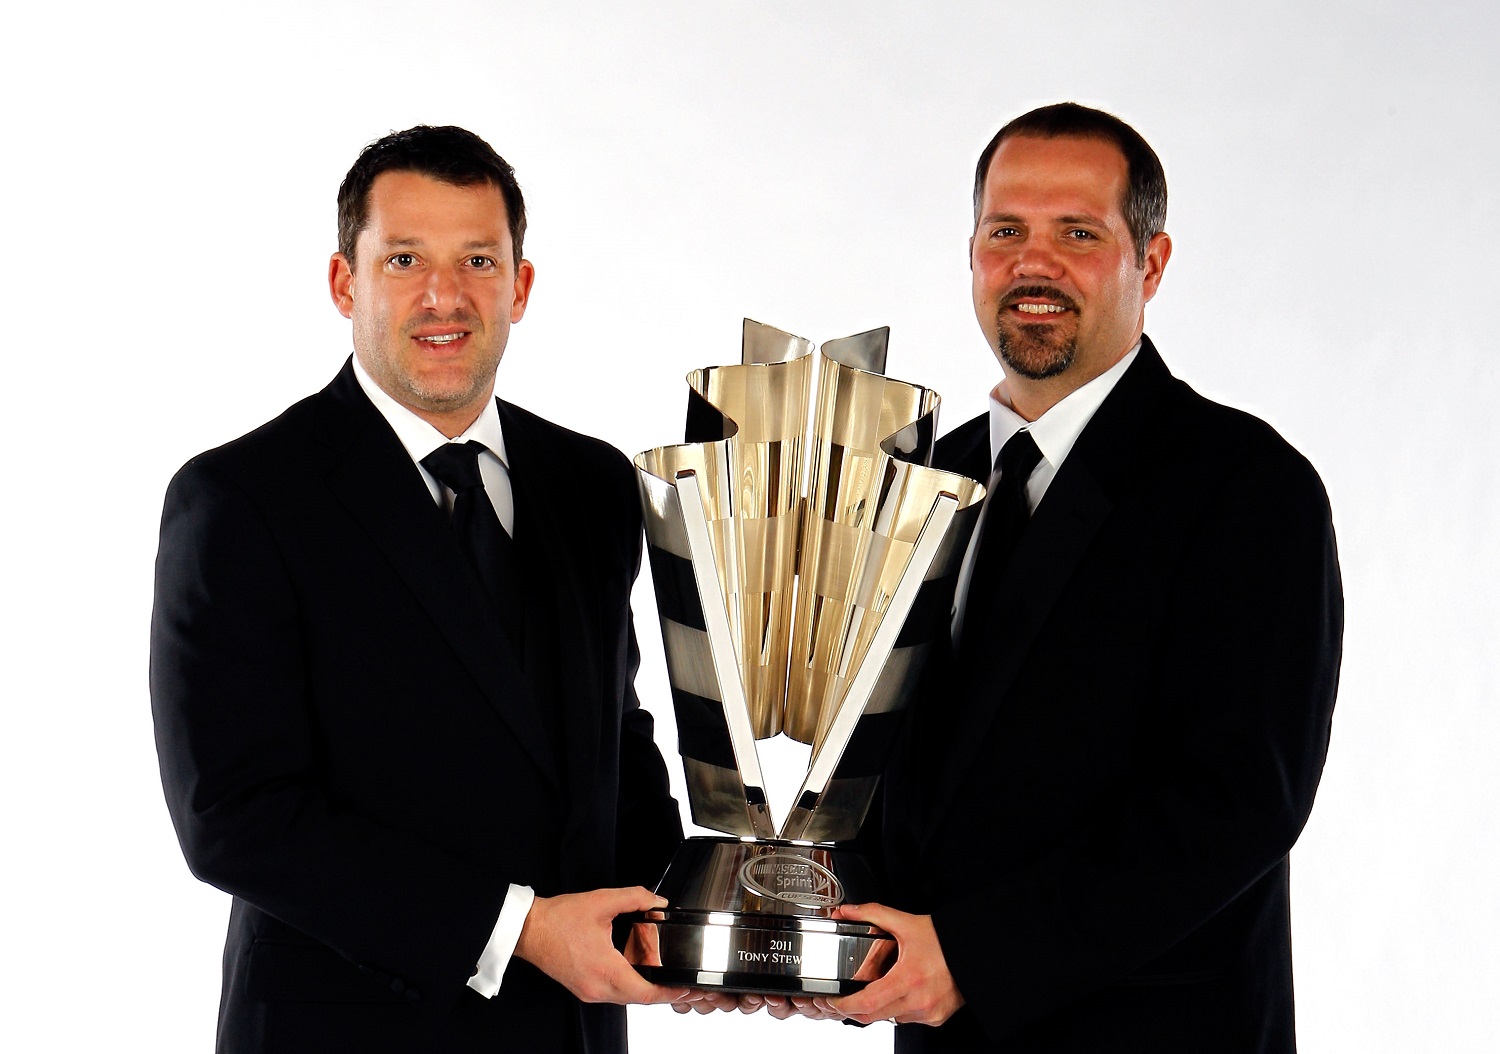 Series champion Tony Stewart and crew chief Darian Grubb pose during the 2011 NASCAR Champions Week awards ceremony.